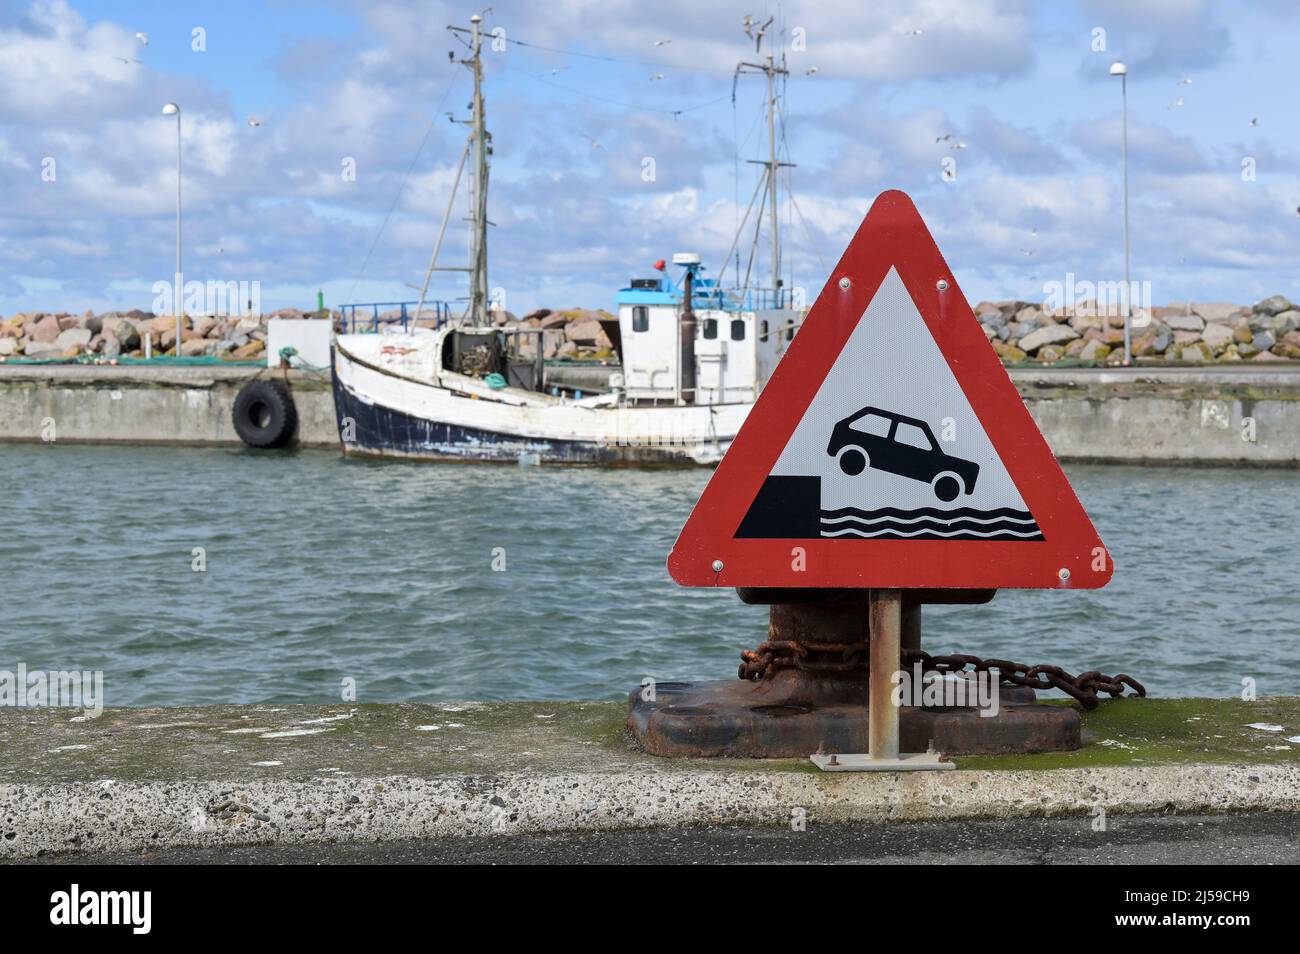 DENMARK, Jutland, Hirtshals, North Sea fishing port with fishing boat and traffic signboard Beware of dock you car may get drowned Stock Photo